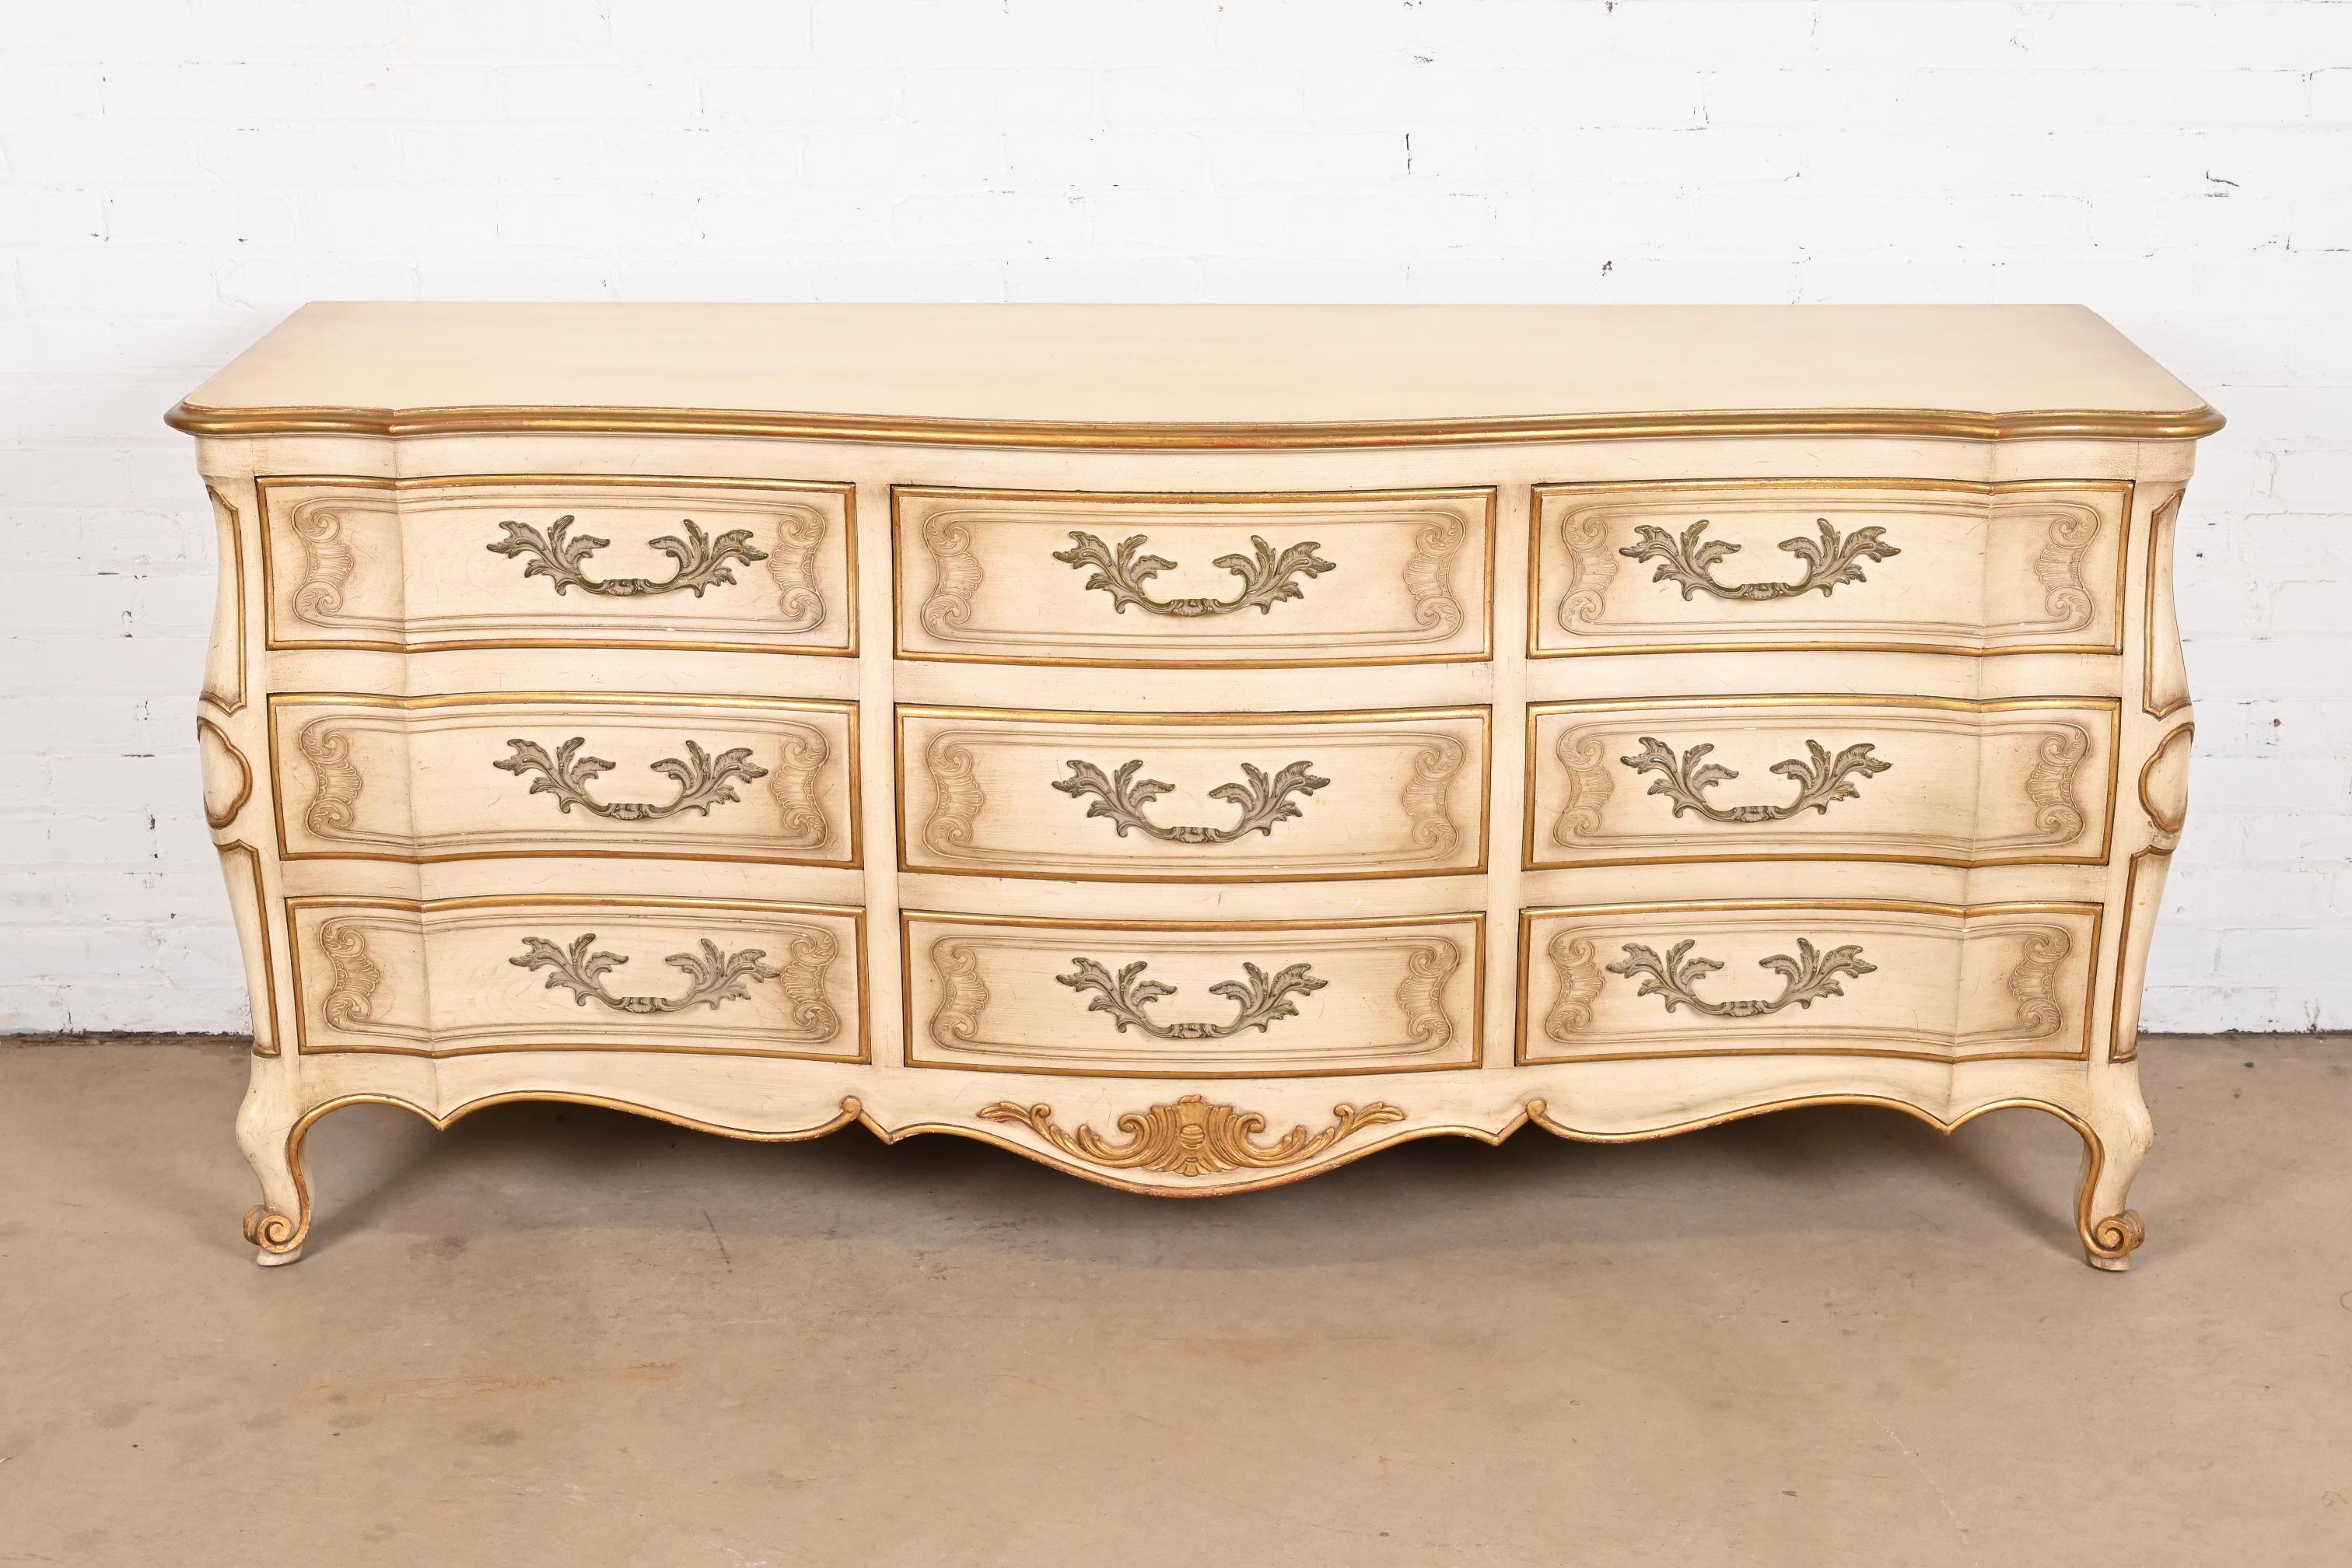 American John Widdicomb French Provincial Louis XV Cream Lacquered Parcel Gilt Dresser For Sale